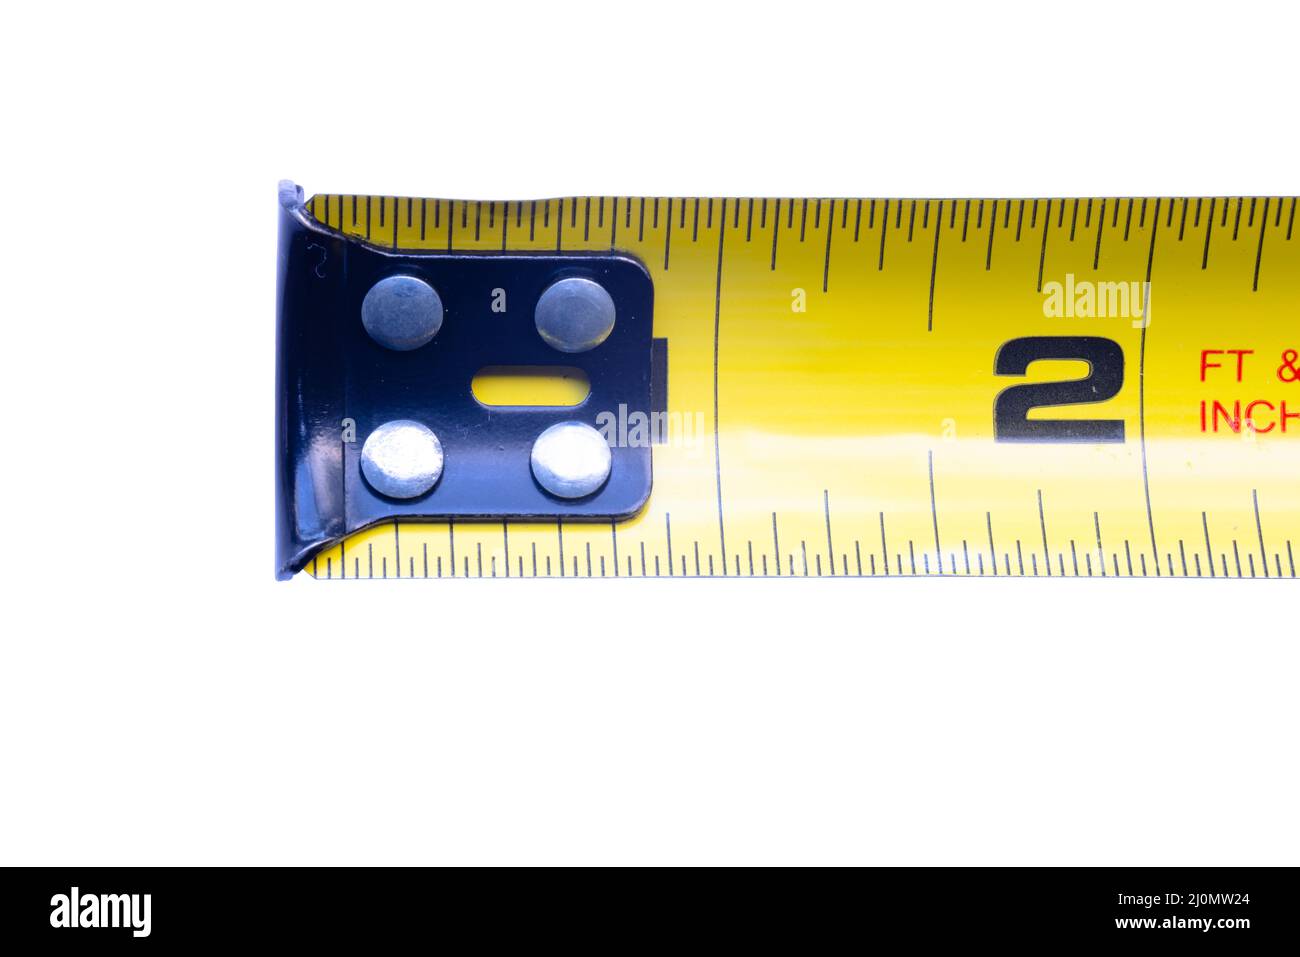 https://c8.alamy.com/comp/2J0MW24/close-up-to-a-tape-measure-a-tape-measure-or-measuring-tape-is-a-flexible-ruler-used-to-measure-size-or-distance-2J0MW24.jpg